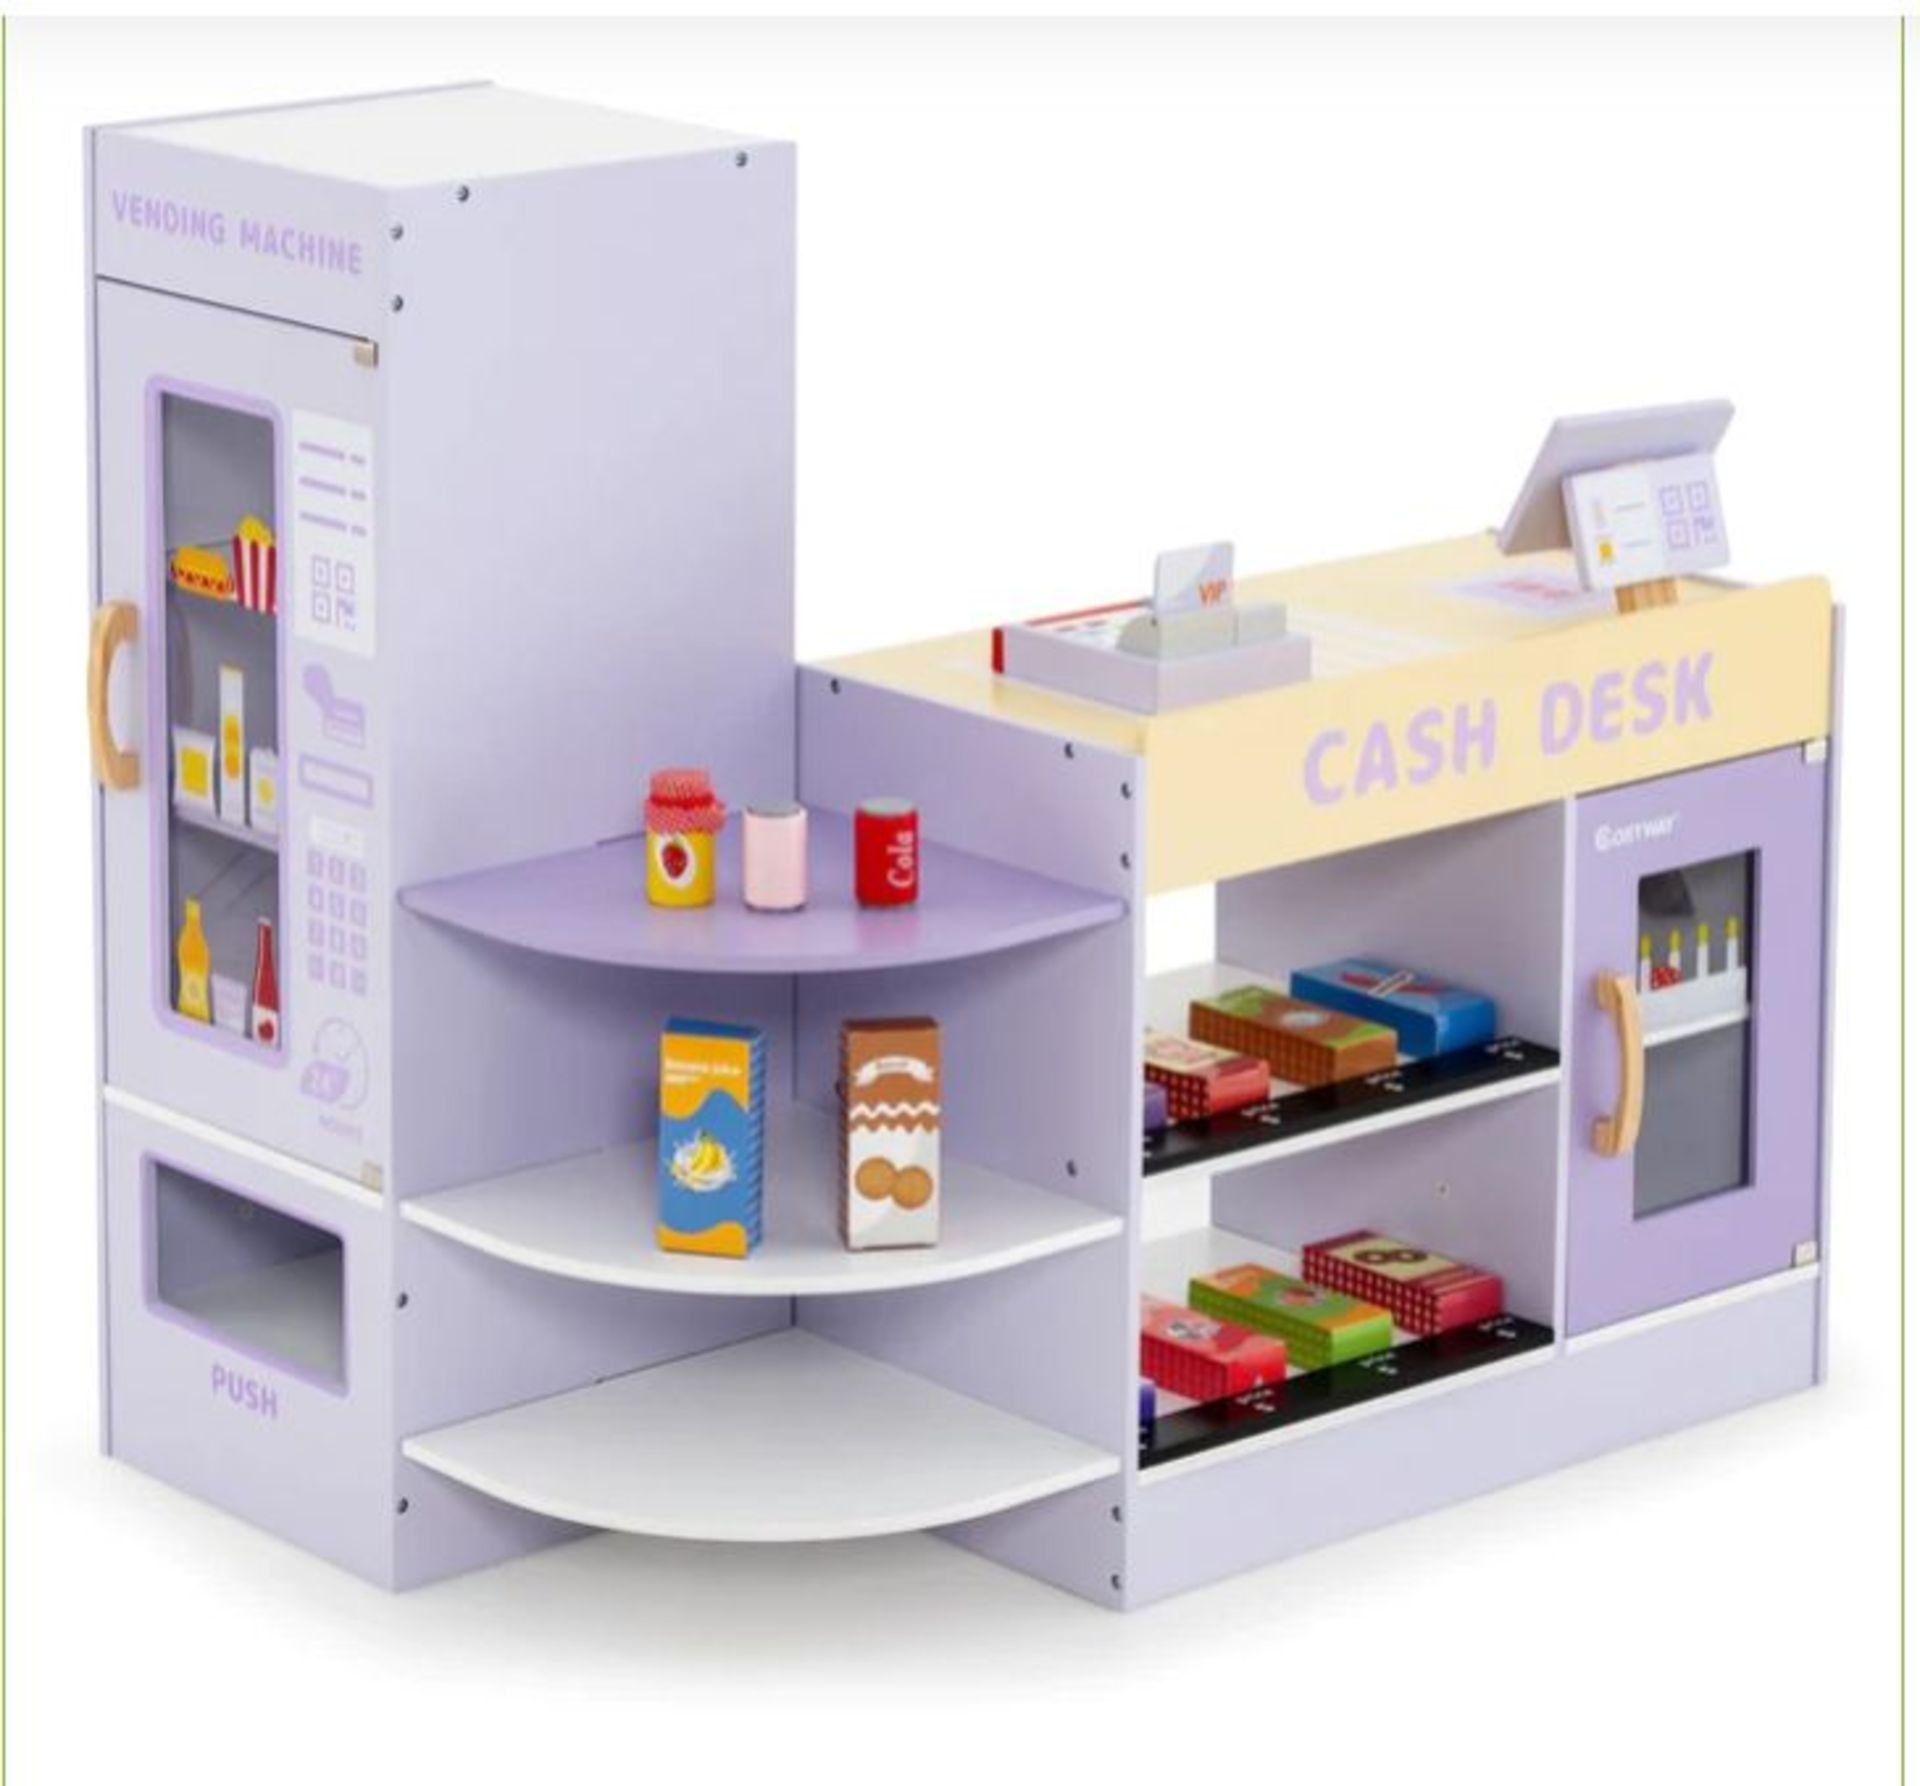 KIDS WOODEN GROCERY STORE SUPERMARKET PLAY TOY SET-PURPLE. - ER53. With a checkout counter and a